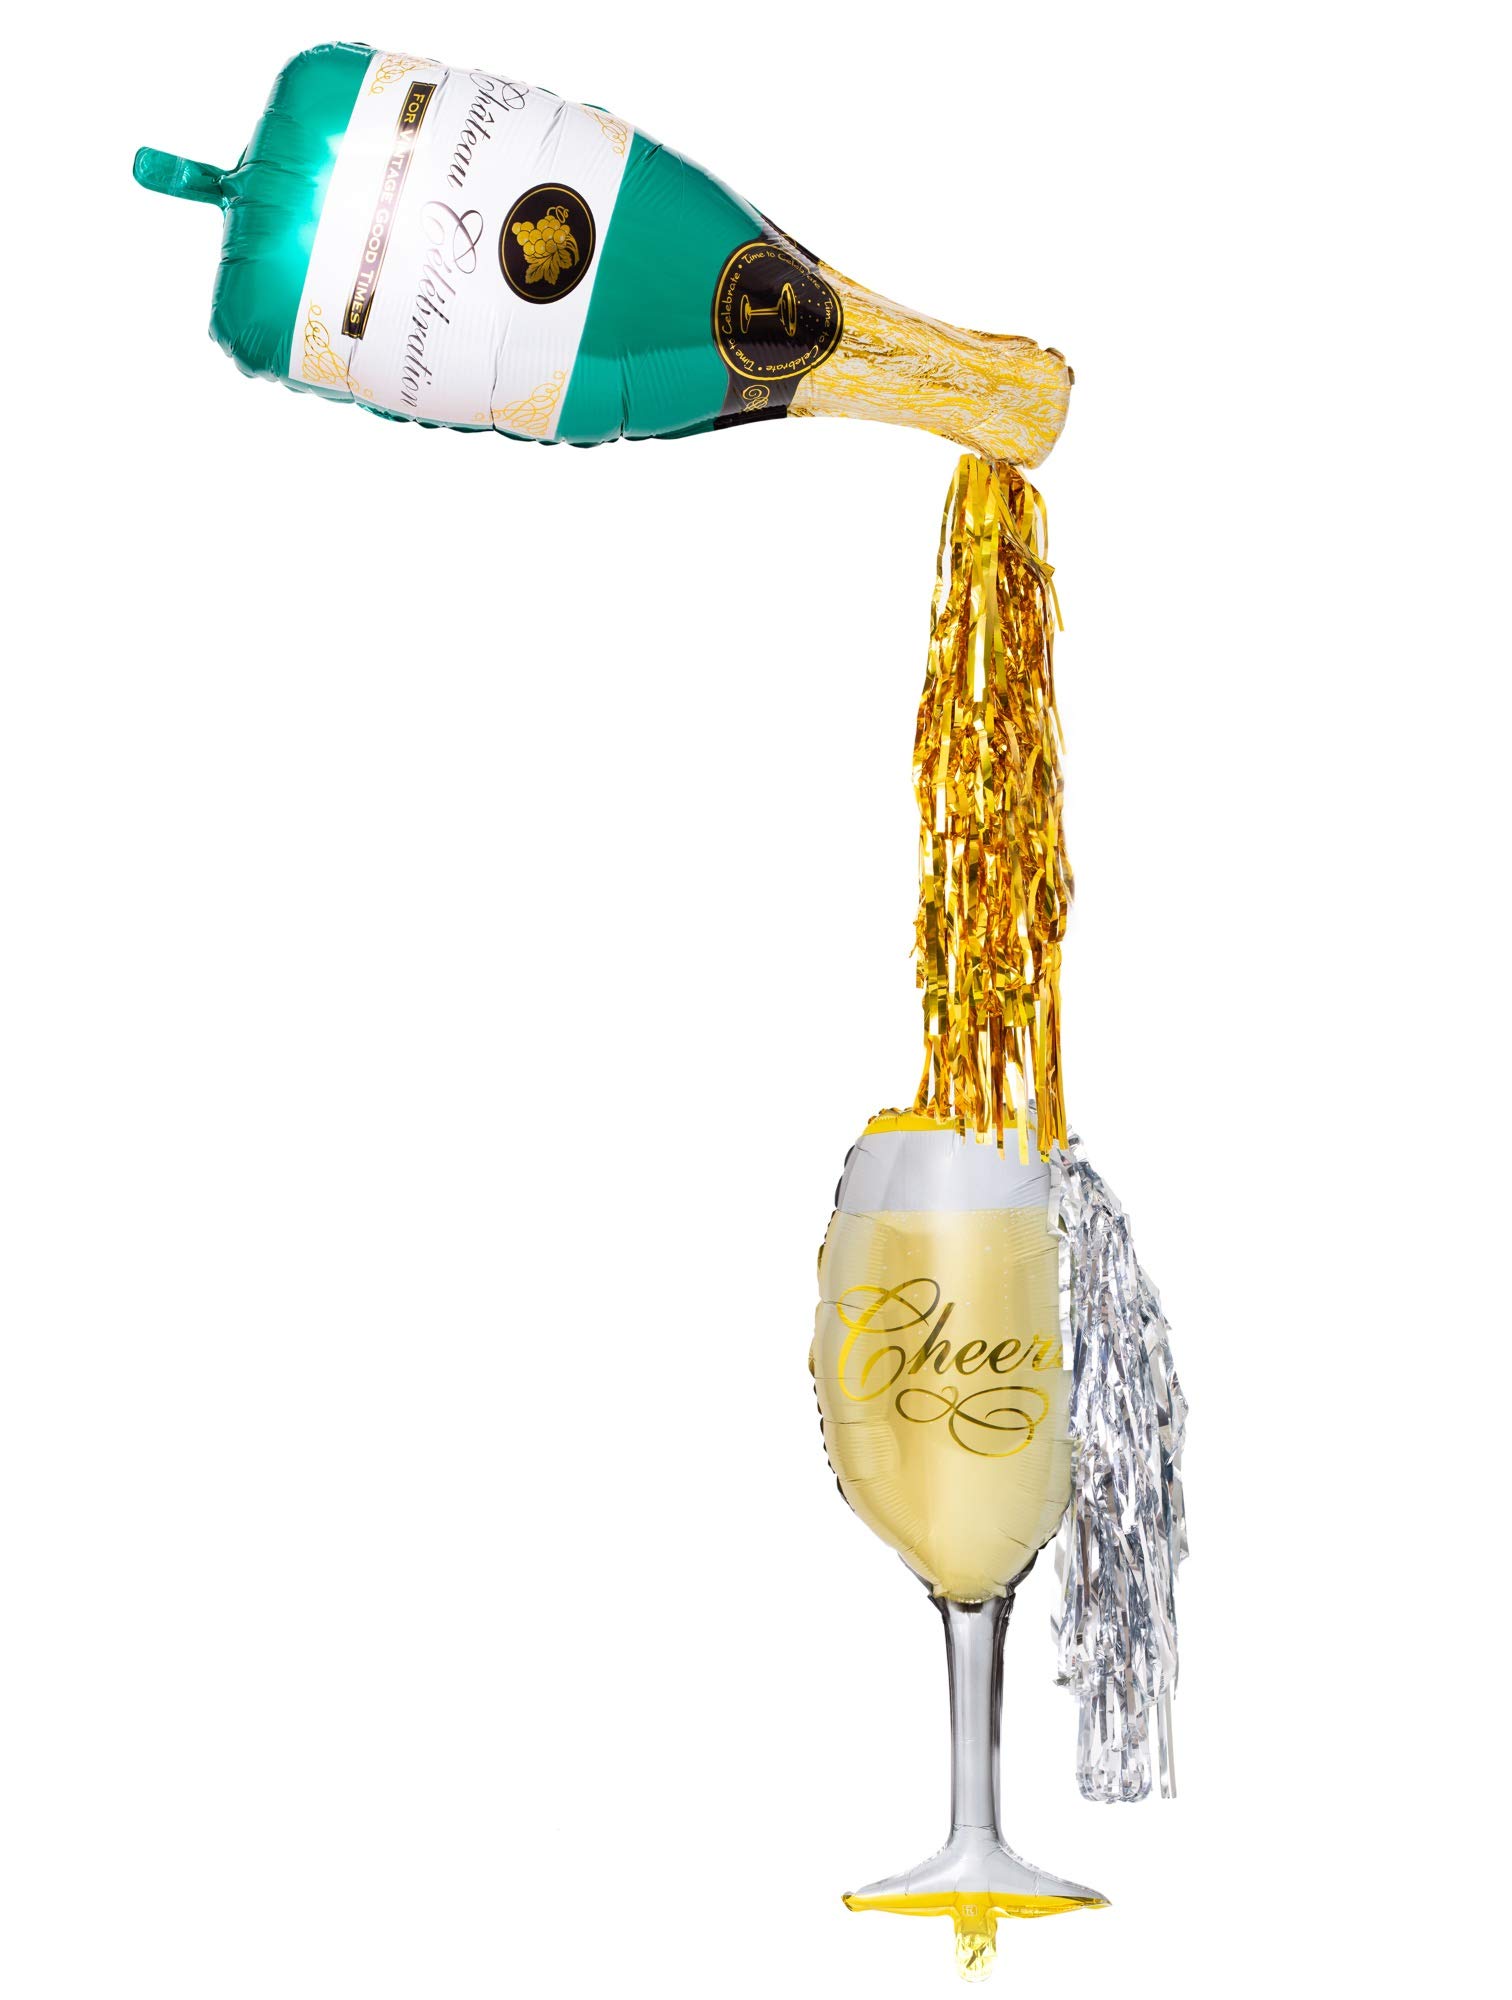 Champagne bottle balloon with flute